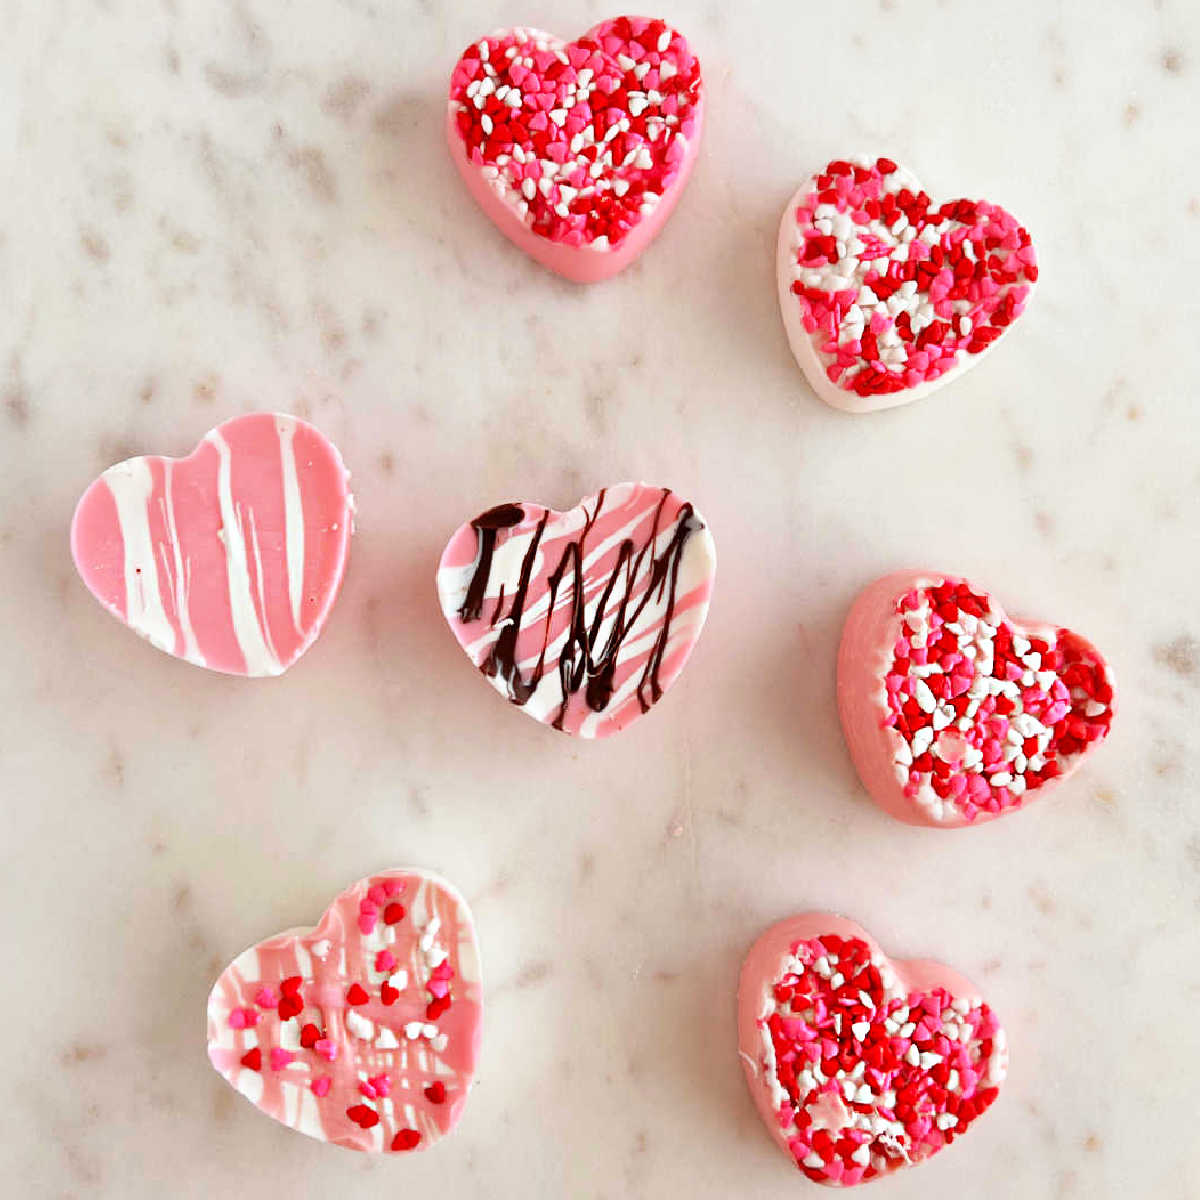 How to make your own Candy Melts